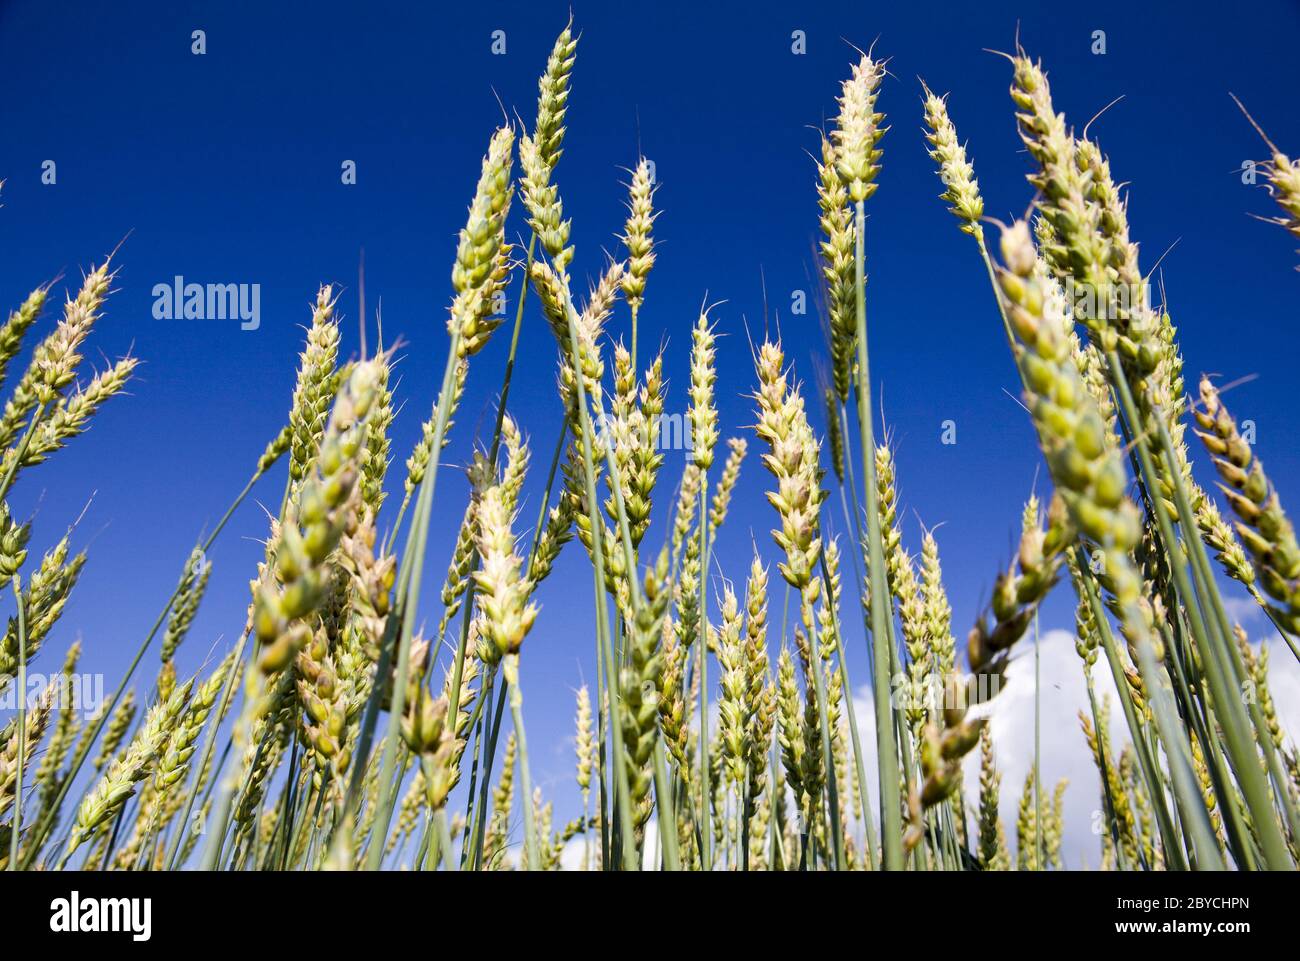 Ears of wheat on sky background Stock Photo